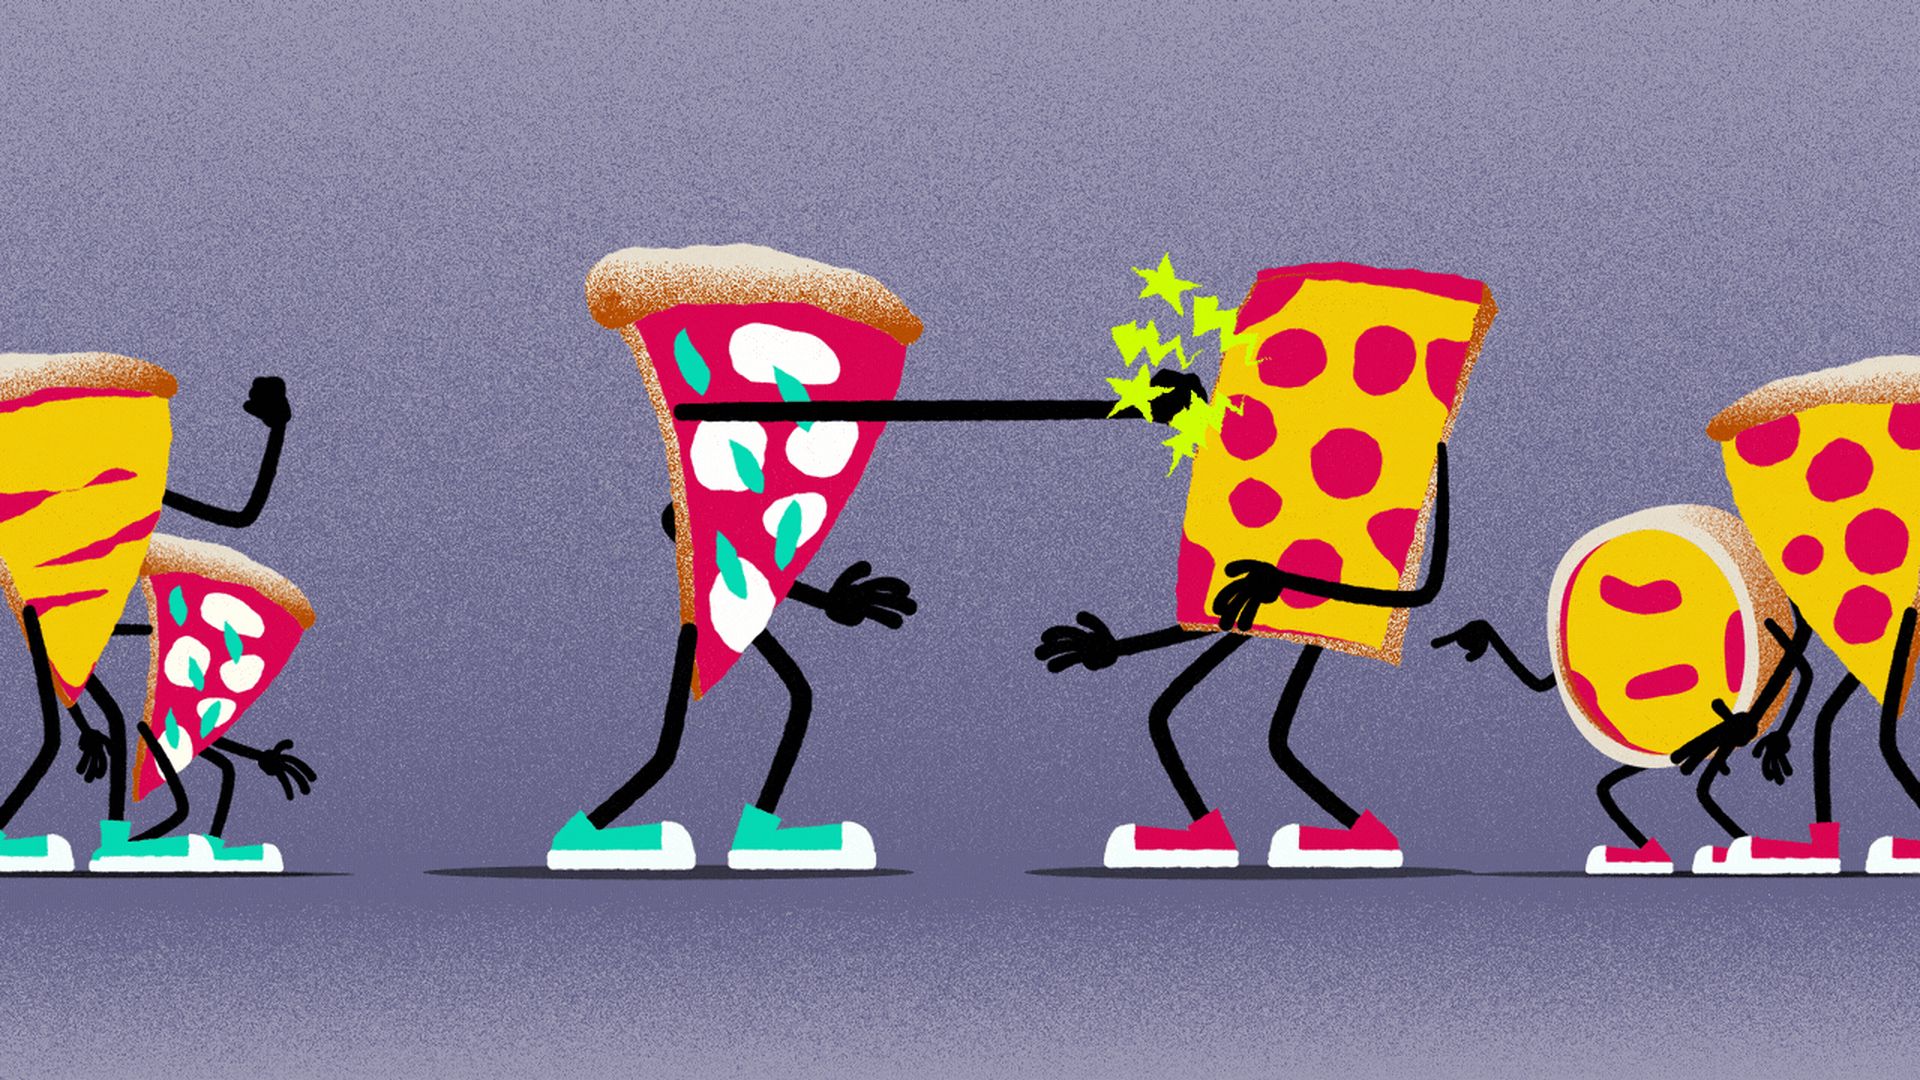 two slices of pizza fight it out